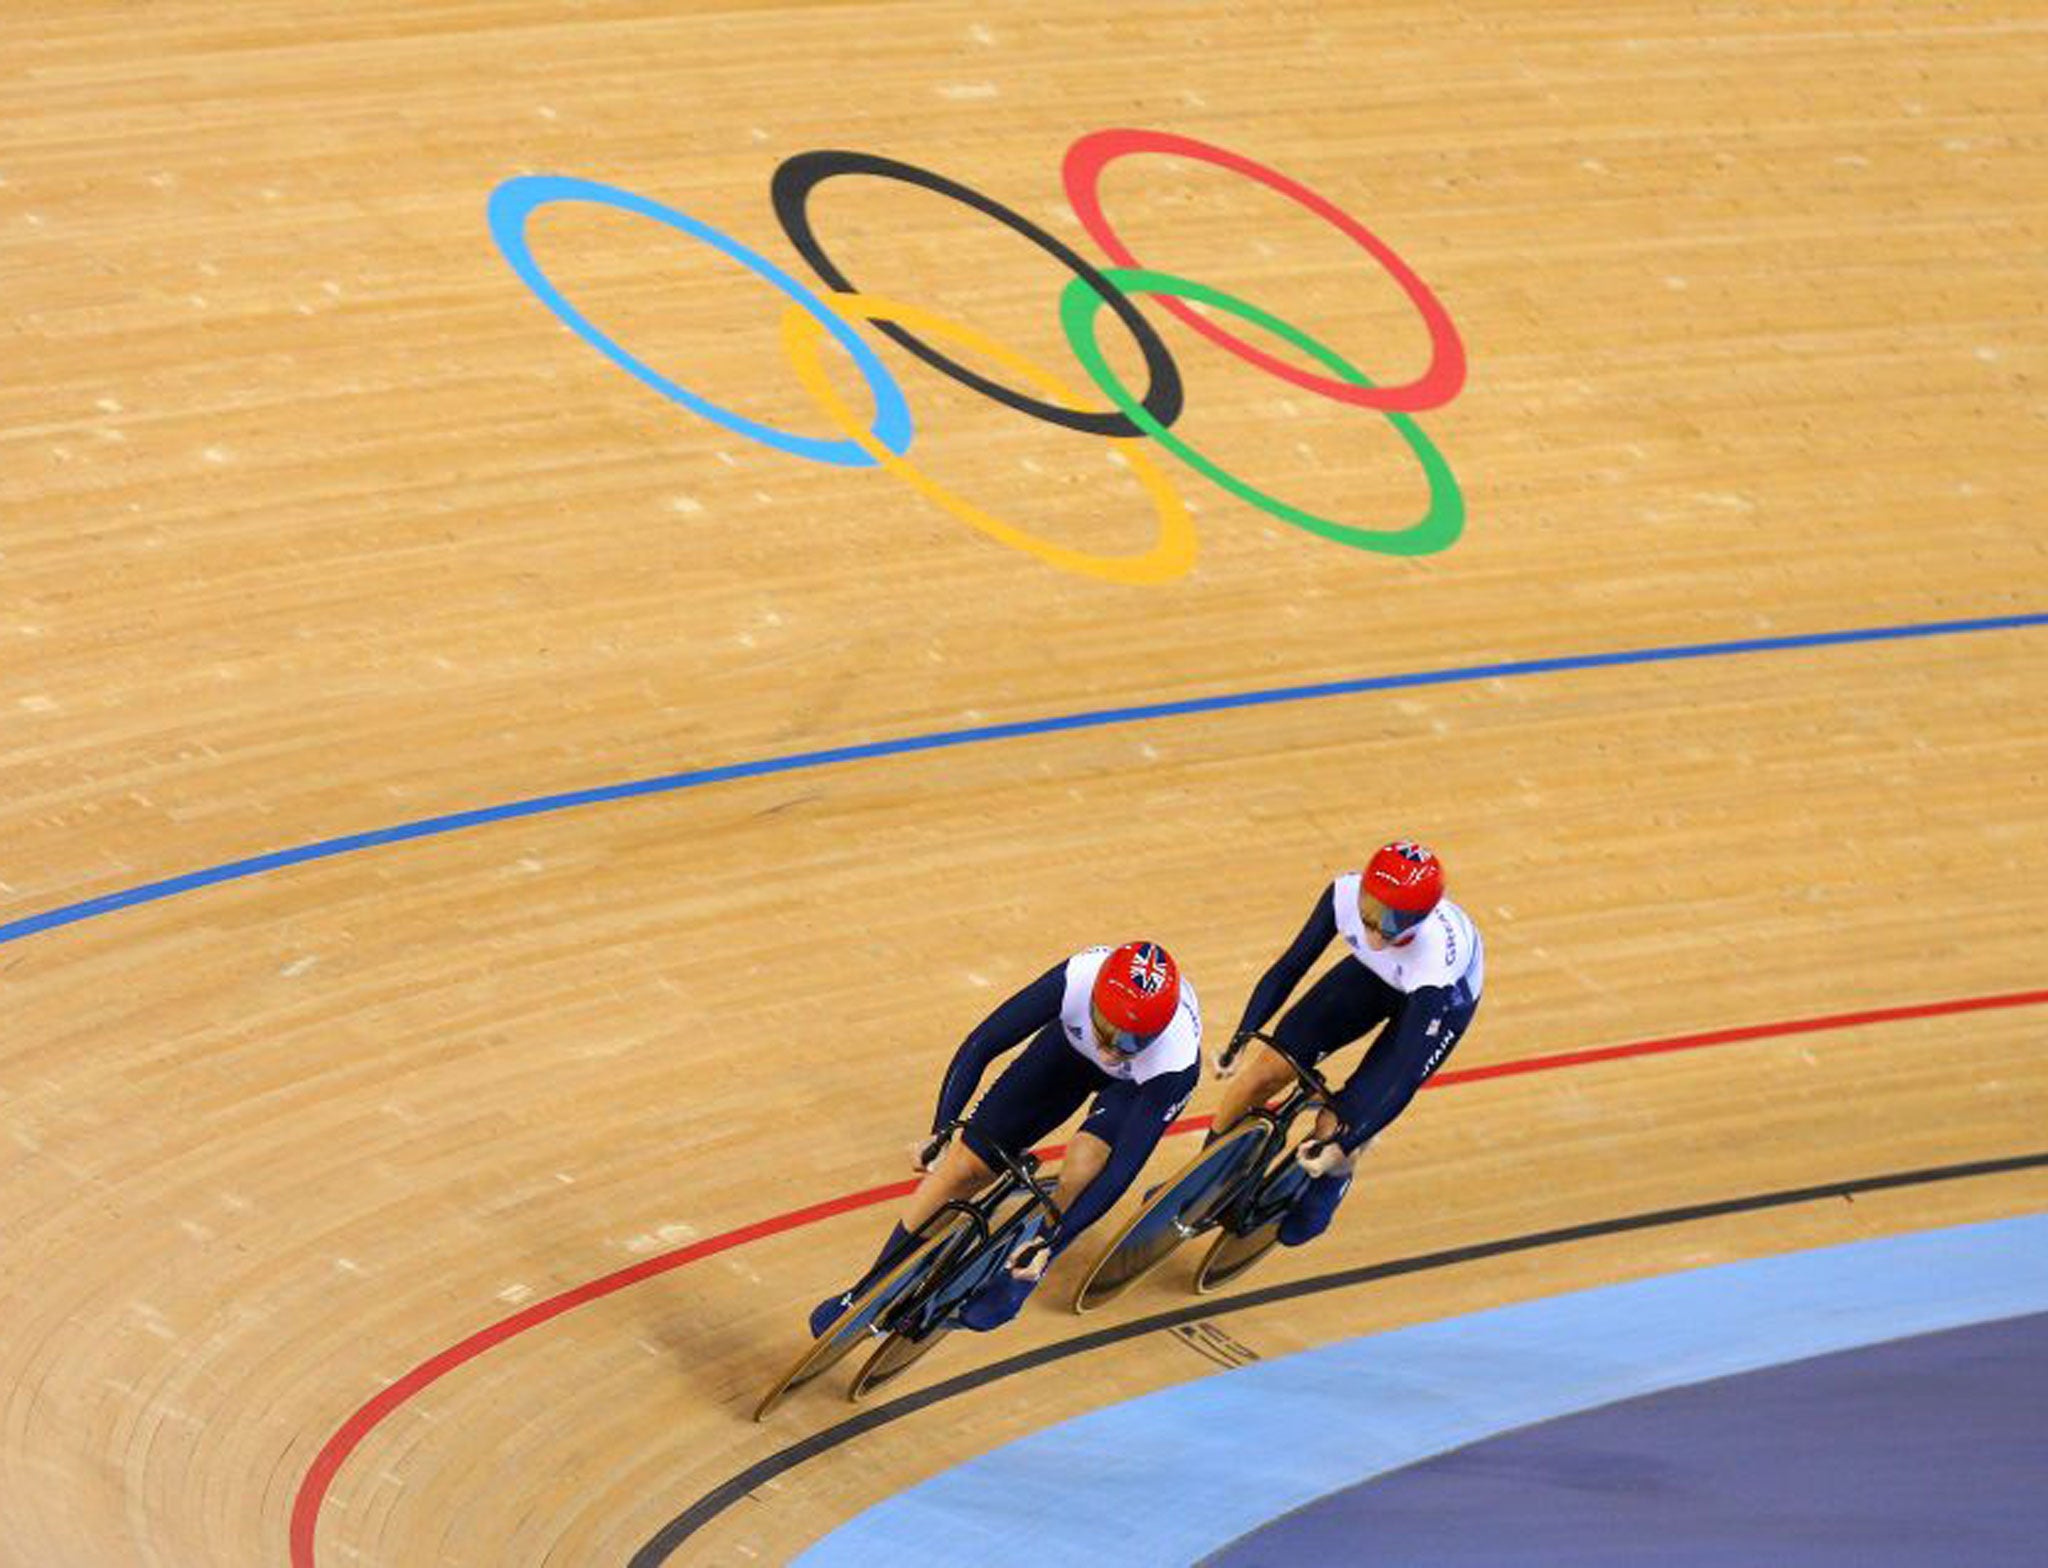 Jess Varnish (front) and Victoria Pendleton at the Olympics